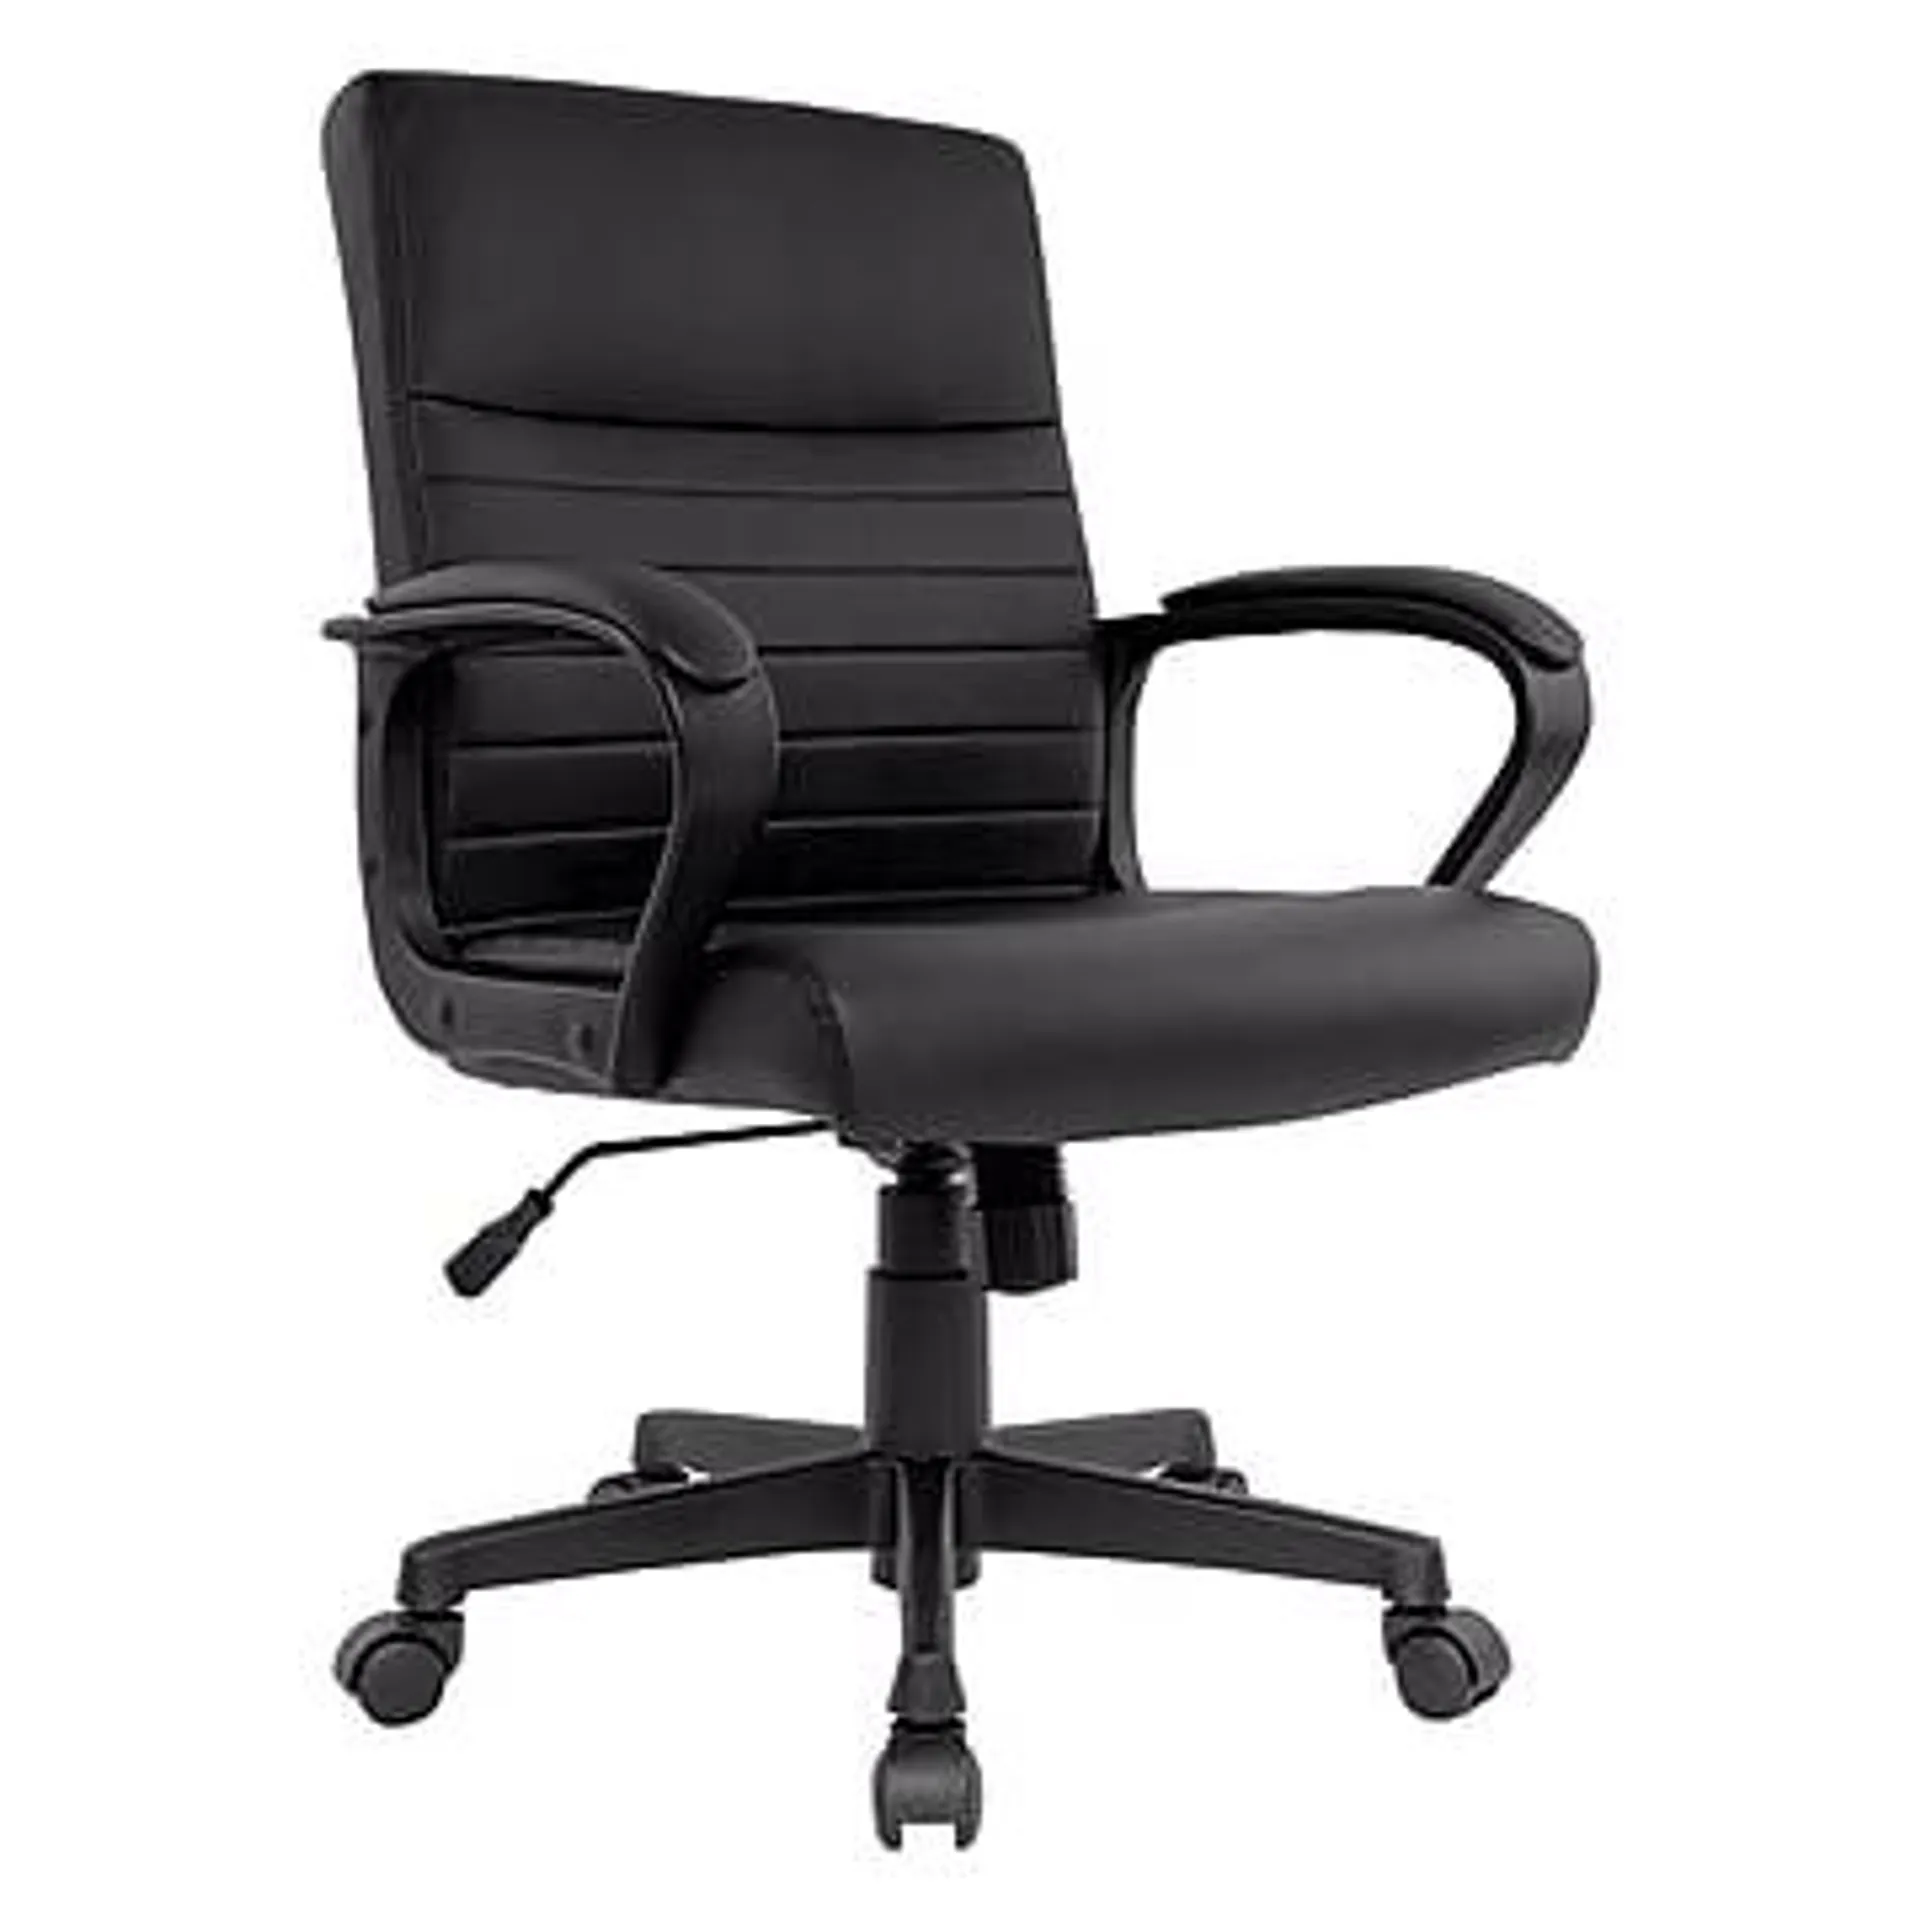 Staples Traymore Ergonomic Faux Leather Swivel Computer and Desk Chair,